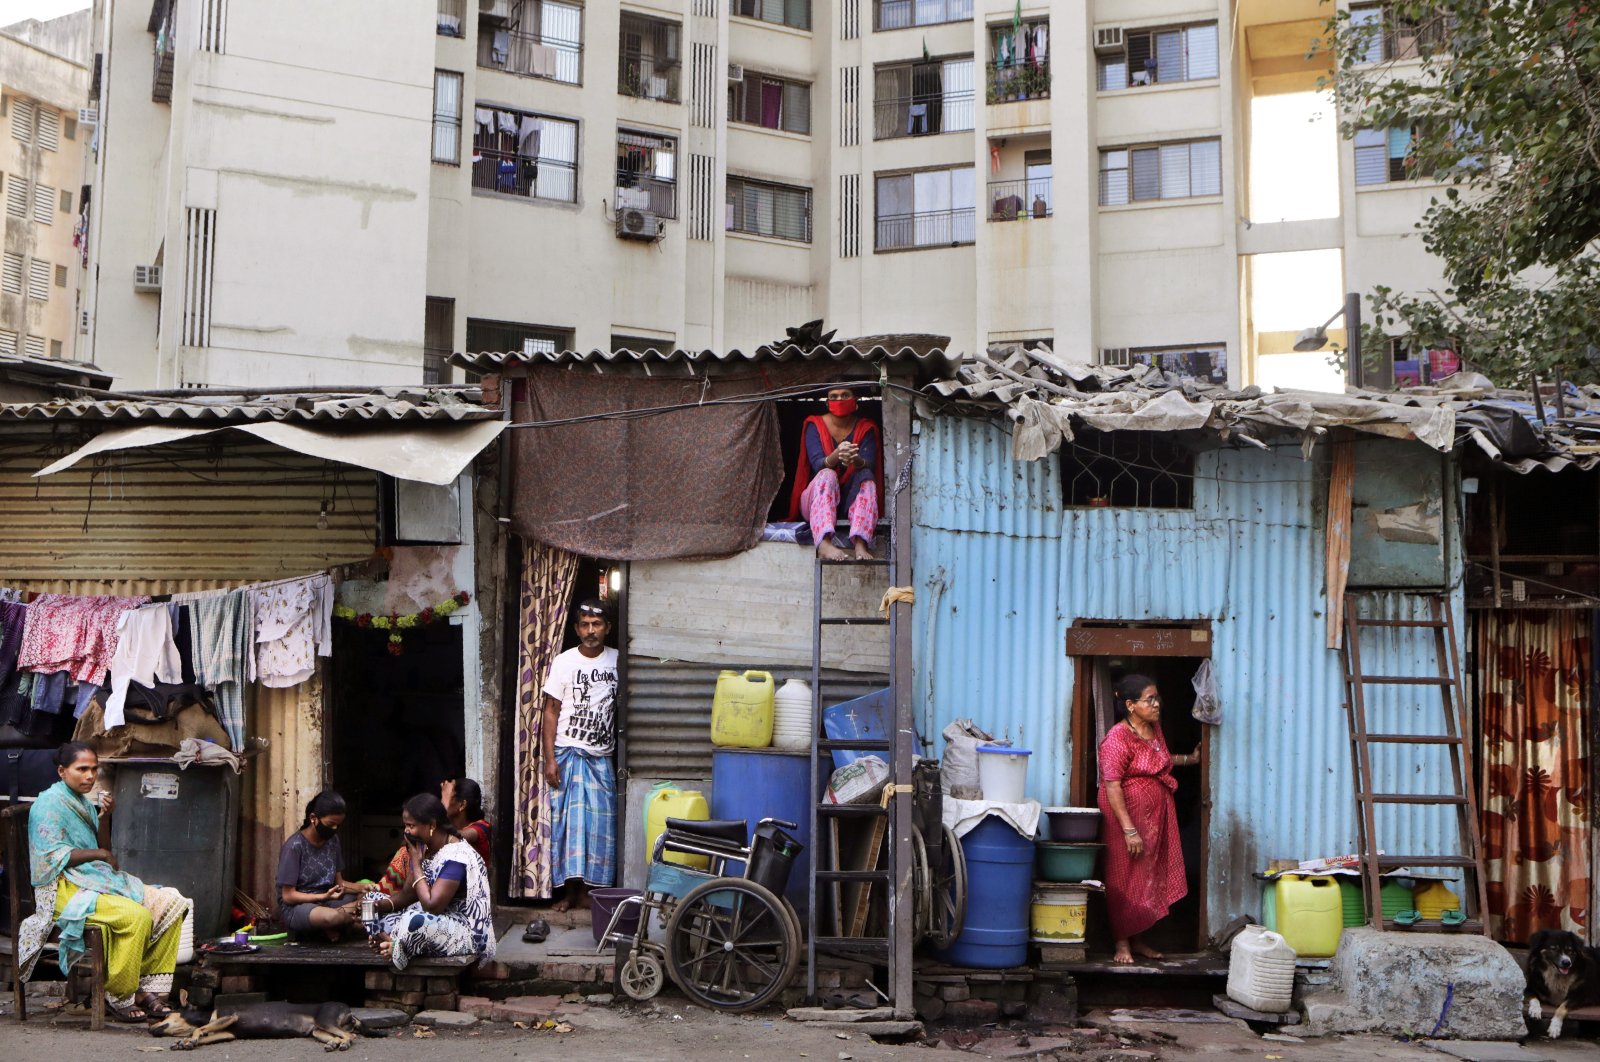 People rest by their shanties at Dharavi, one of Asia's largest slums, during lockdown to prevent the spread of the coronavirus, Mumbai, India, April 3, 2020. (AP Photo)